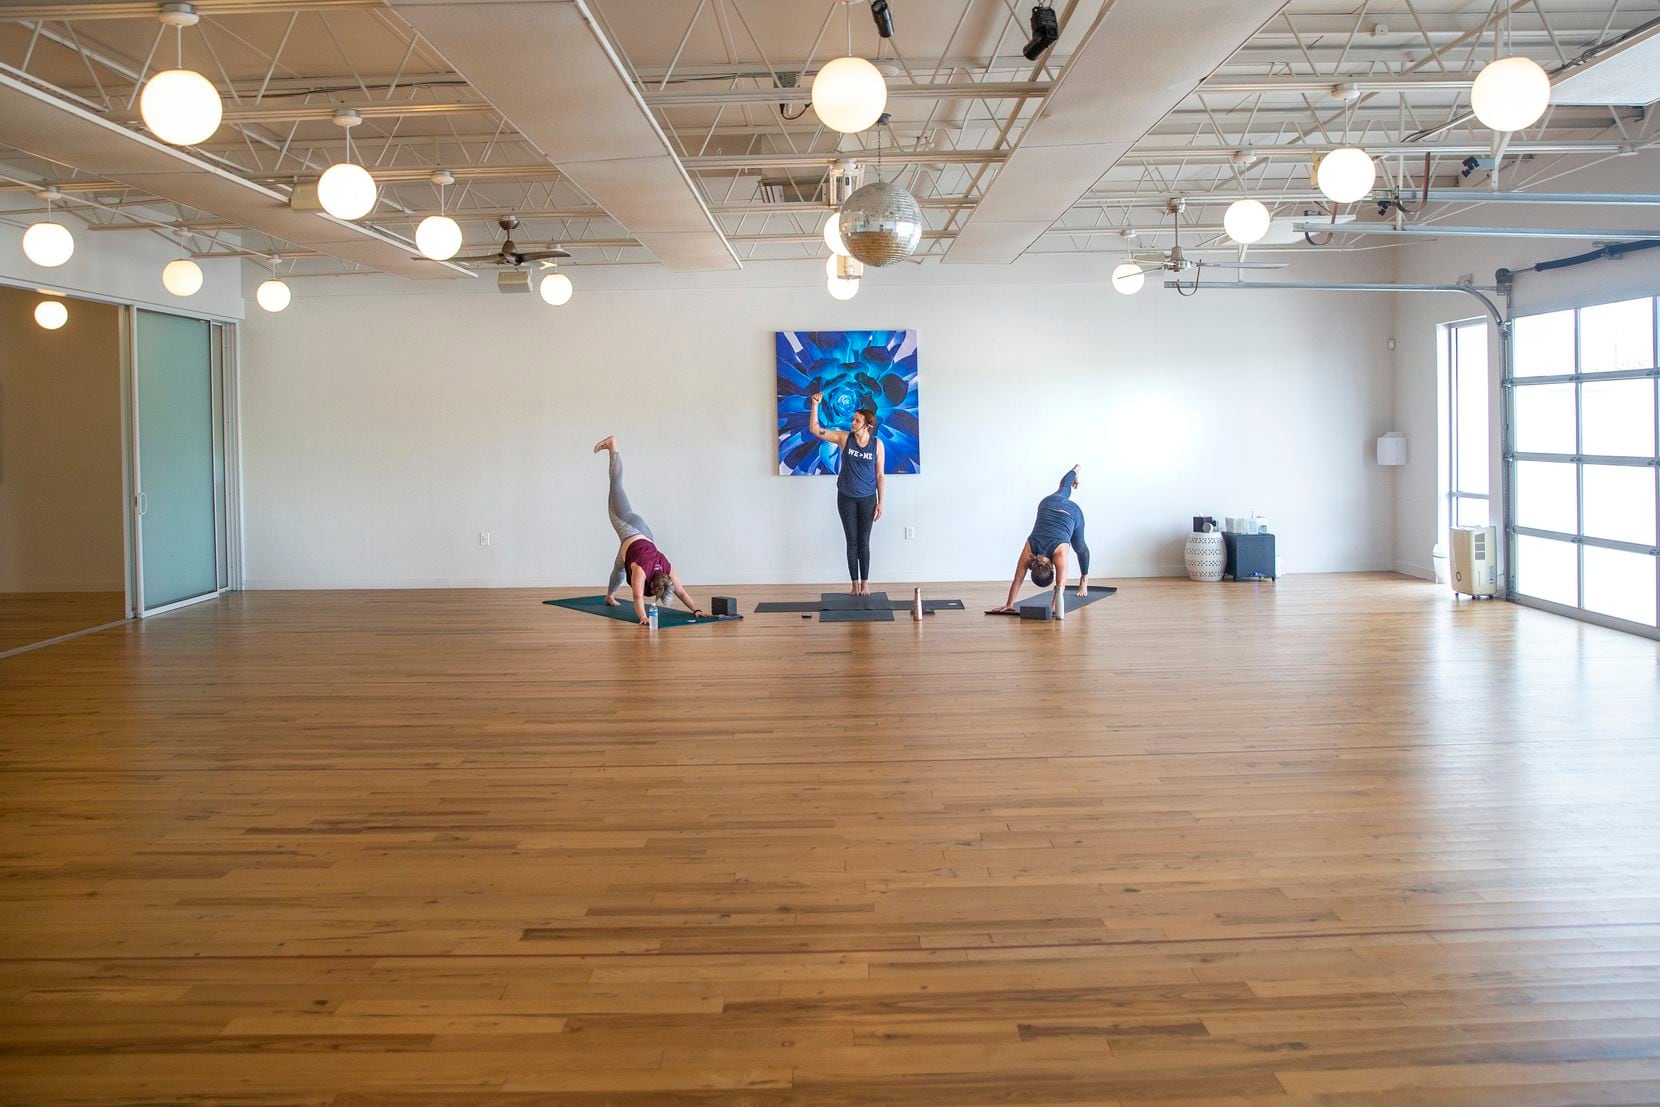 Certified yoga instructor Alli Carpenter (center) looks up to a digital video camera to address students attending an online all-levels Baptiste yoga flow class in which instructors Valary Bobb (left) and Kila Rennaker demonstrate poses at the Indigo Yoga studio in Fort Worth, Texas, on Wednesday, March 18, 2020. The studio transferred their classes to an online format in light of the COVID-19 pandemic precautions encouraging individuals to stay home. (Lynda M. Gonzalez/The Dallas Morning News)